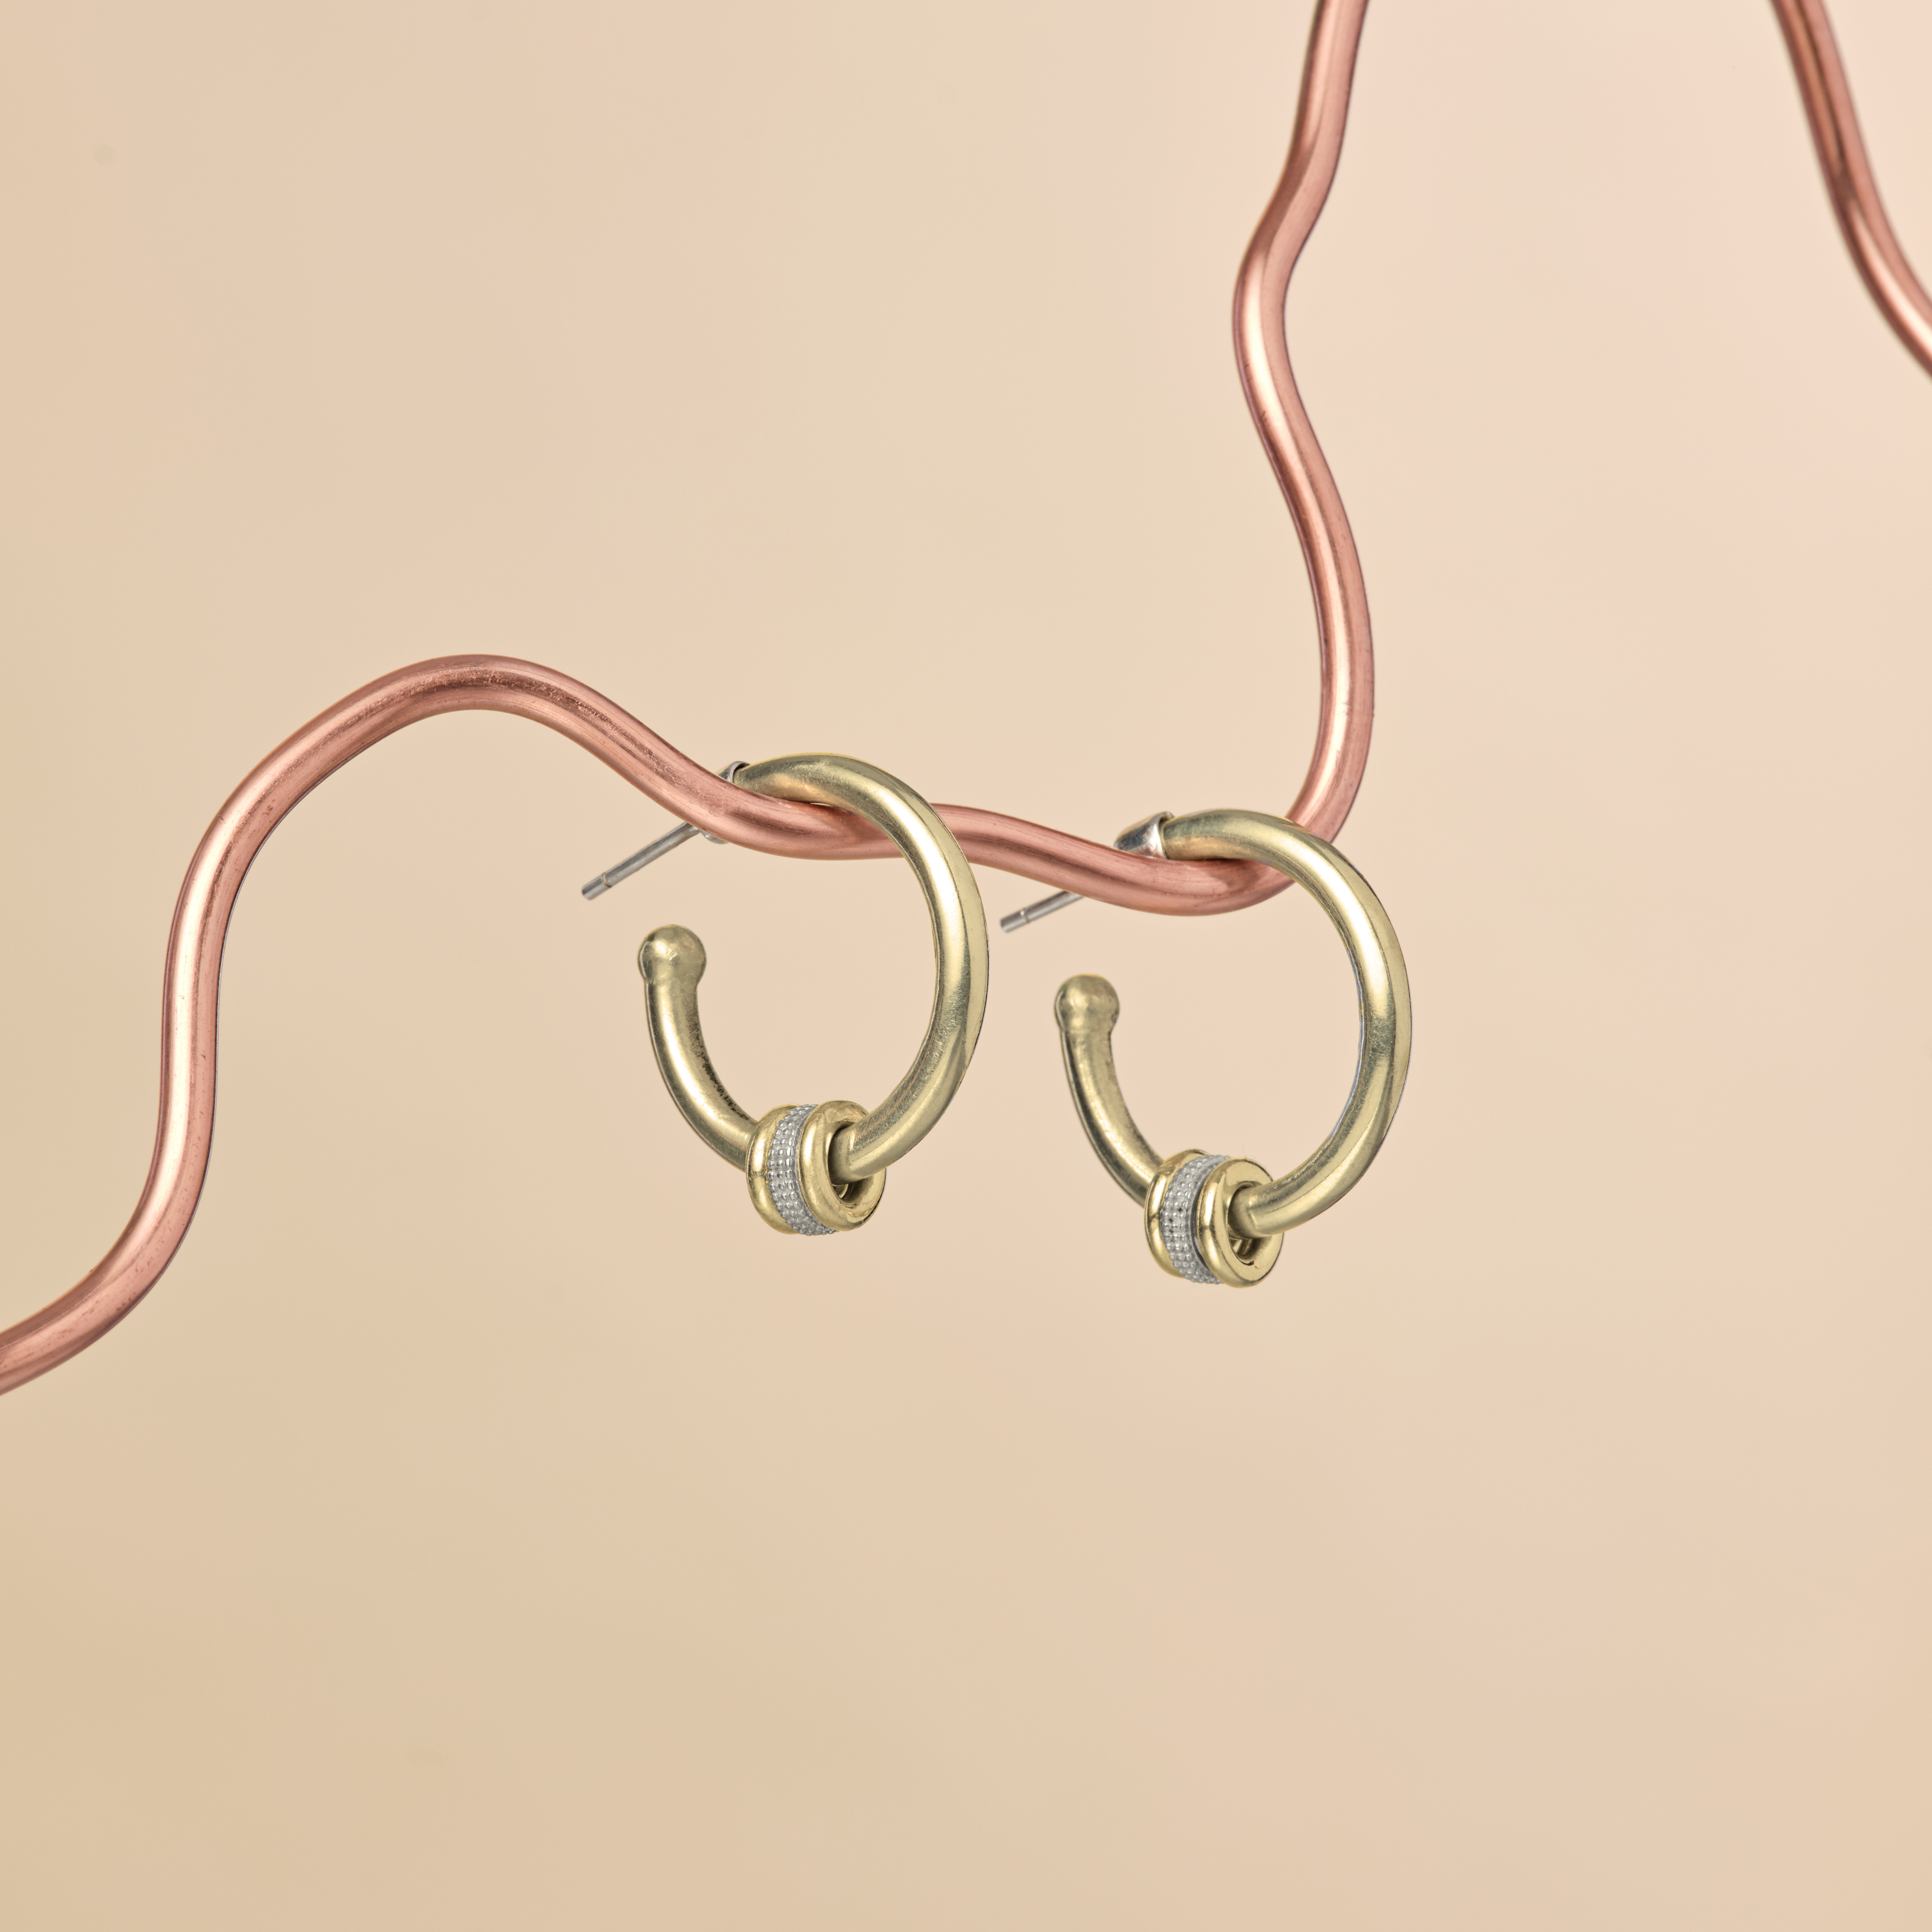 Illuminate Your Style with the Eco-Friendly ORBIT HOOPS - 